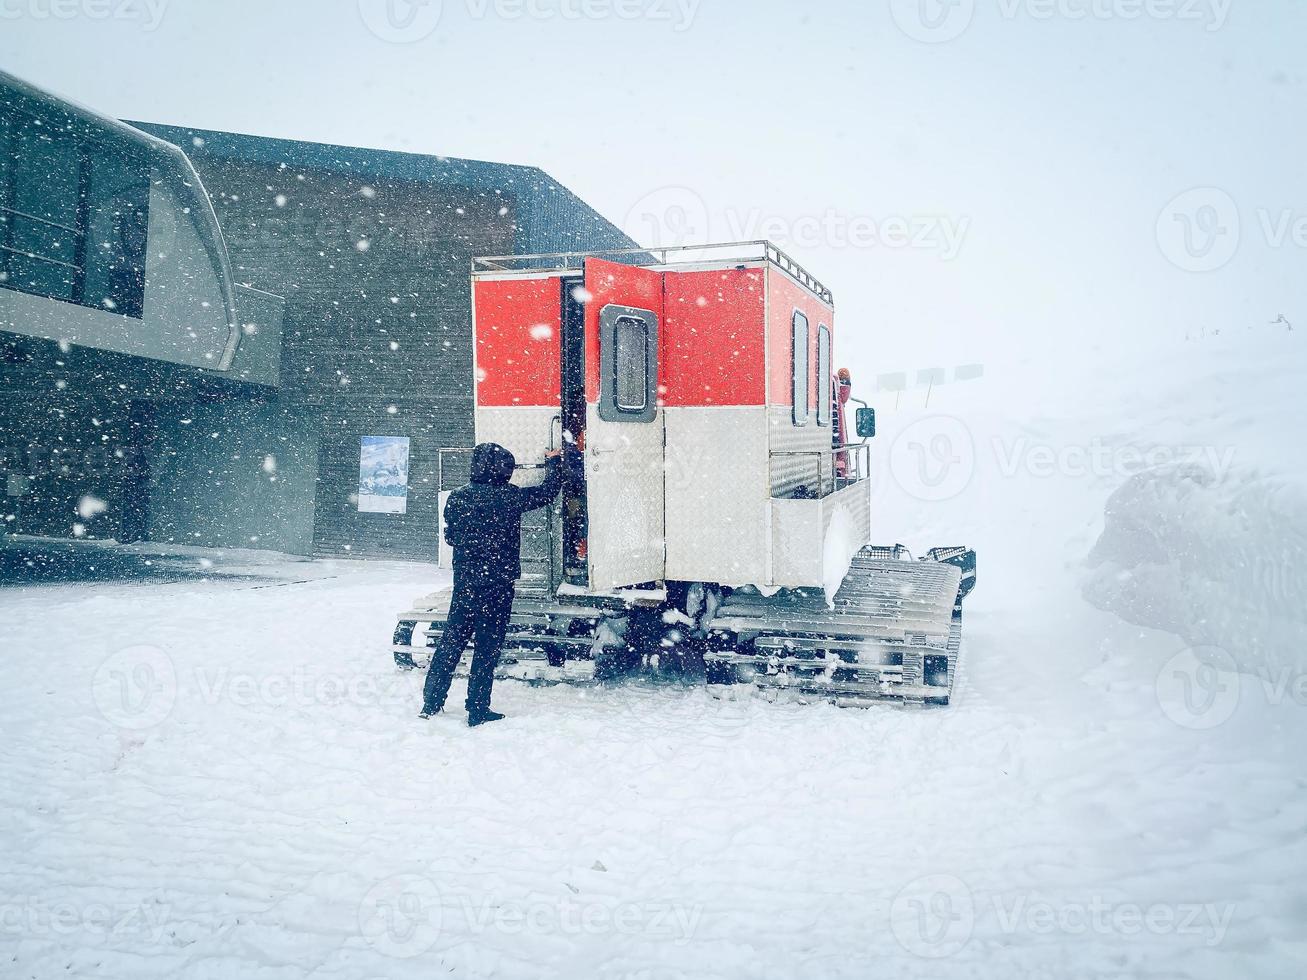 Snowcat with cabin to take skiers snowboarders freeride downhill in remote caucasus mountains. Ratrak in Goderdzi experience photo